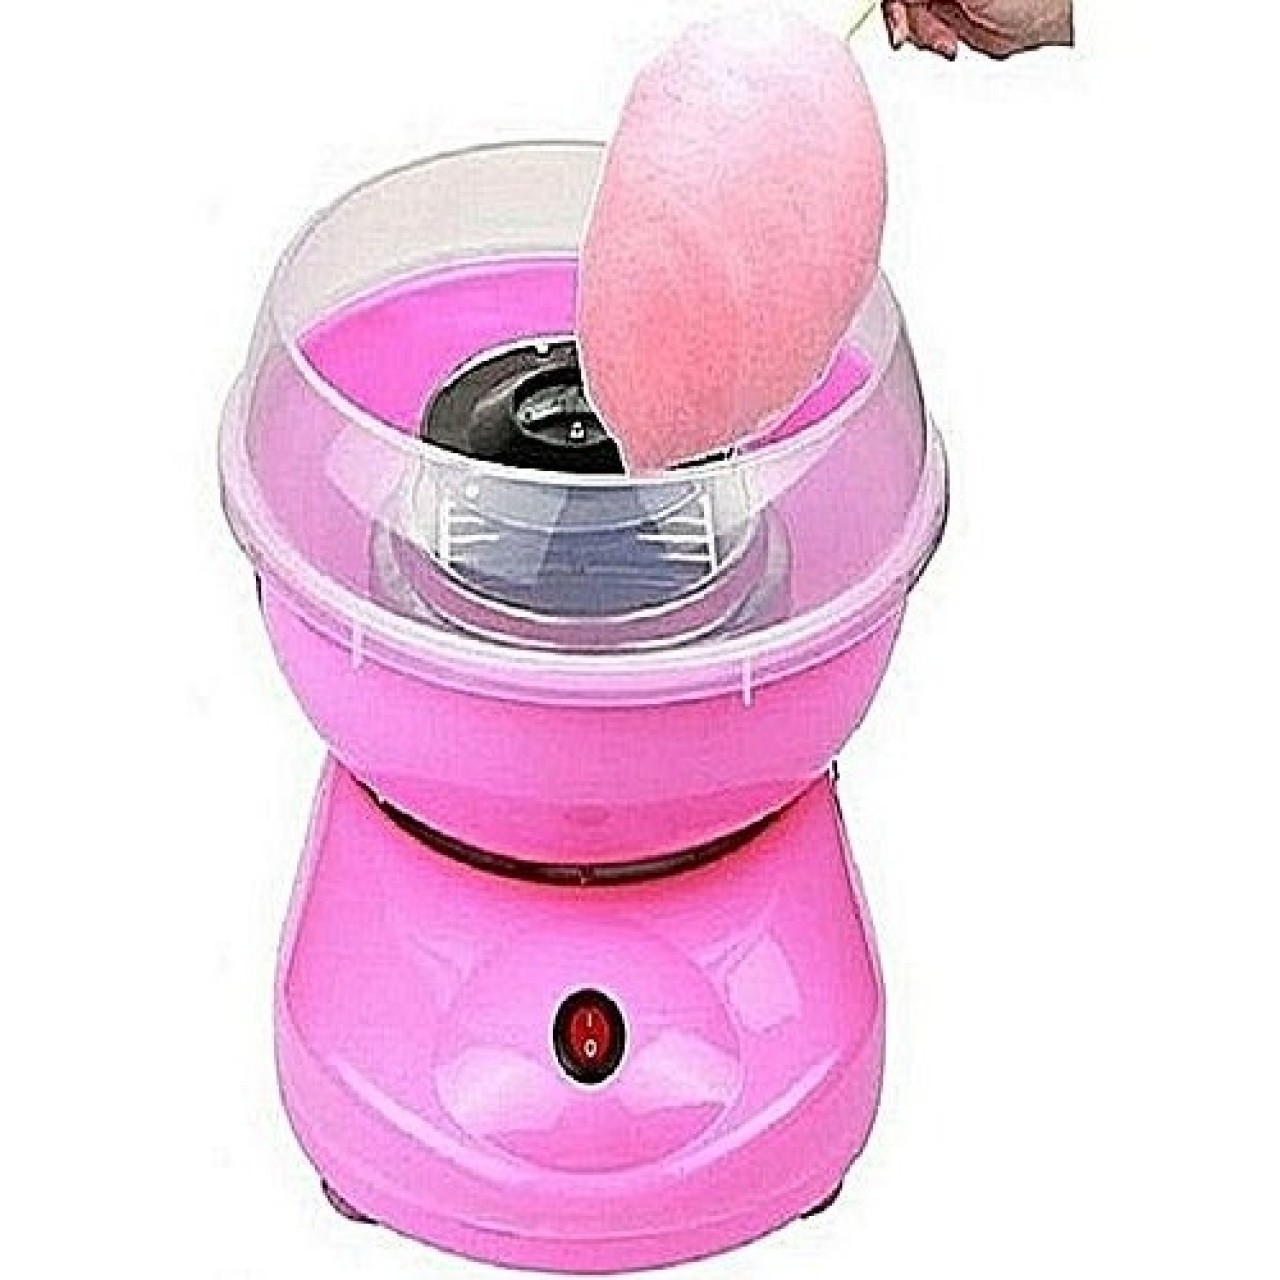 Cotton Candy Machine For Kids - Air spin technology